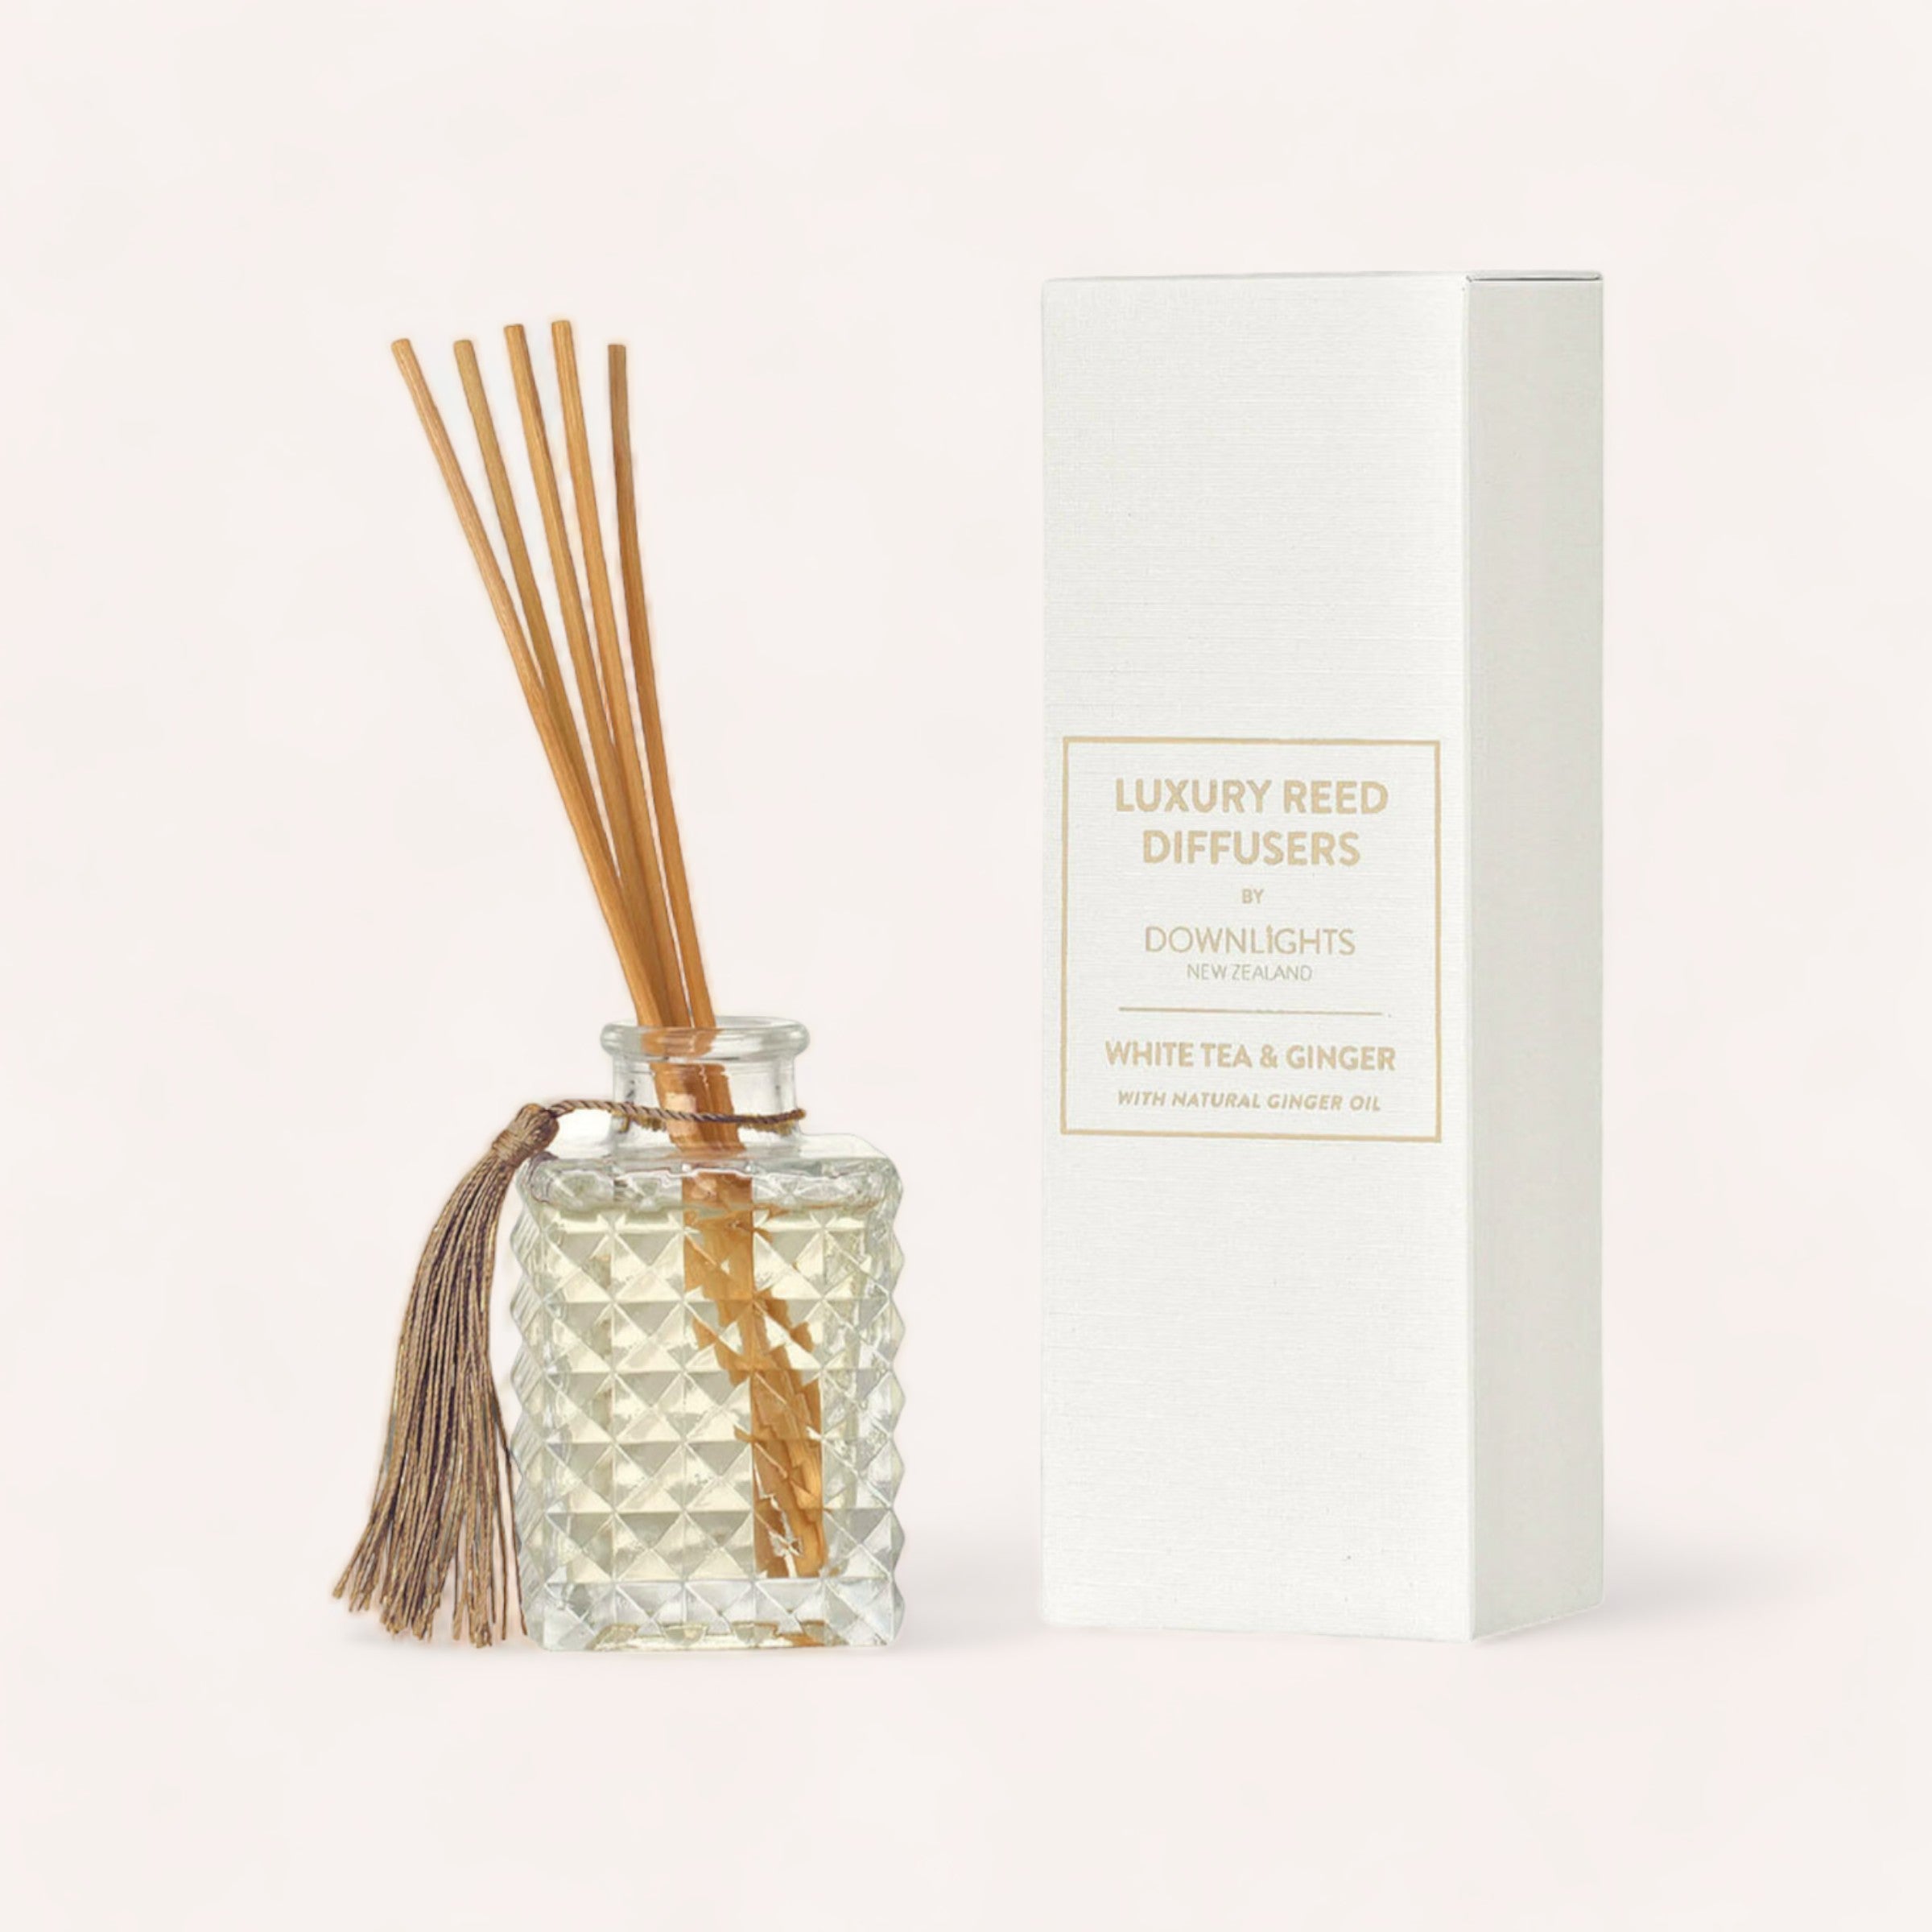 A luxury White Tea & Ginger Diffuser by Downlights, complete with rattan sticks, displayed next to its packaging. Product of New Zealand.